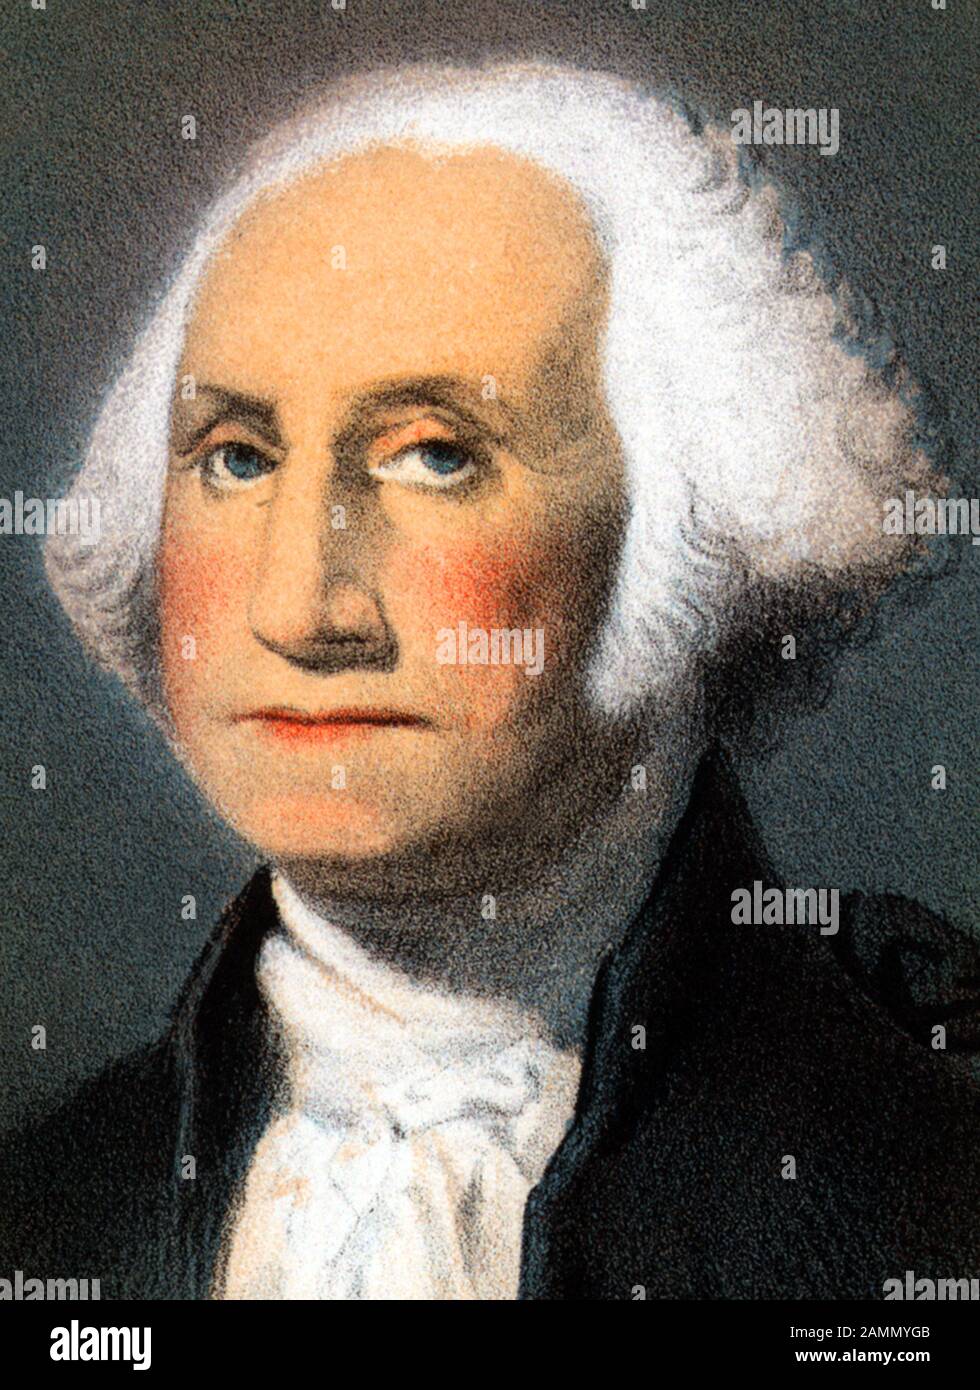 Vintage portrait of George Washington (1732 - 1799) – Commander of the Continental Army in the American Revolutionary War / War of Independence (1775 – 1783) and the first US President (1789 - 1797). Detail from a print circa 1870 by Strobridge & Co of Cincinnati. Stock Photo